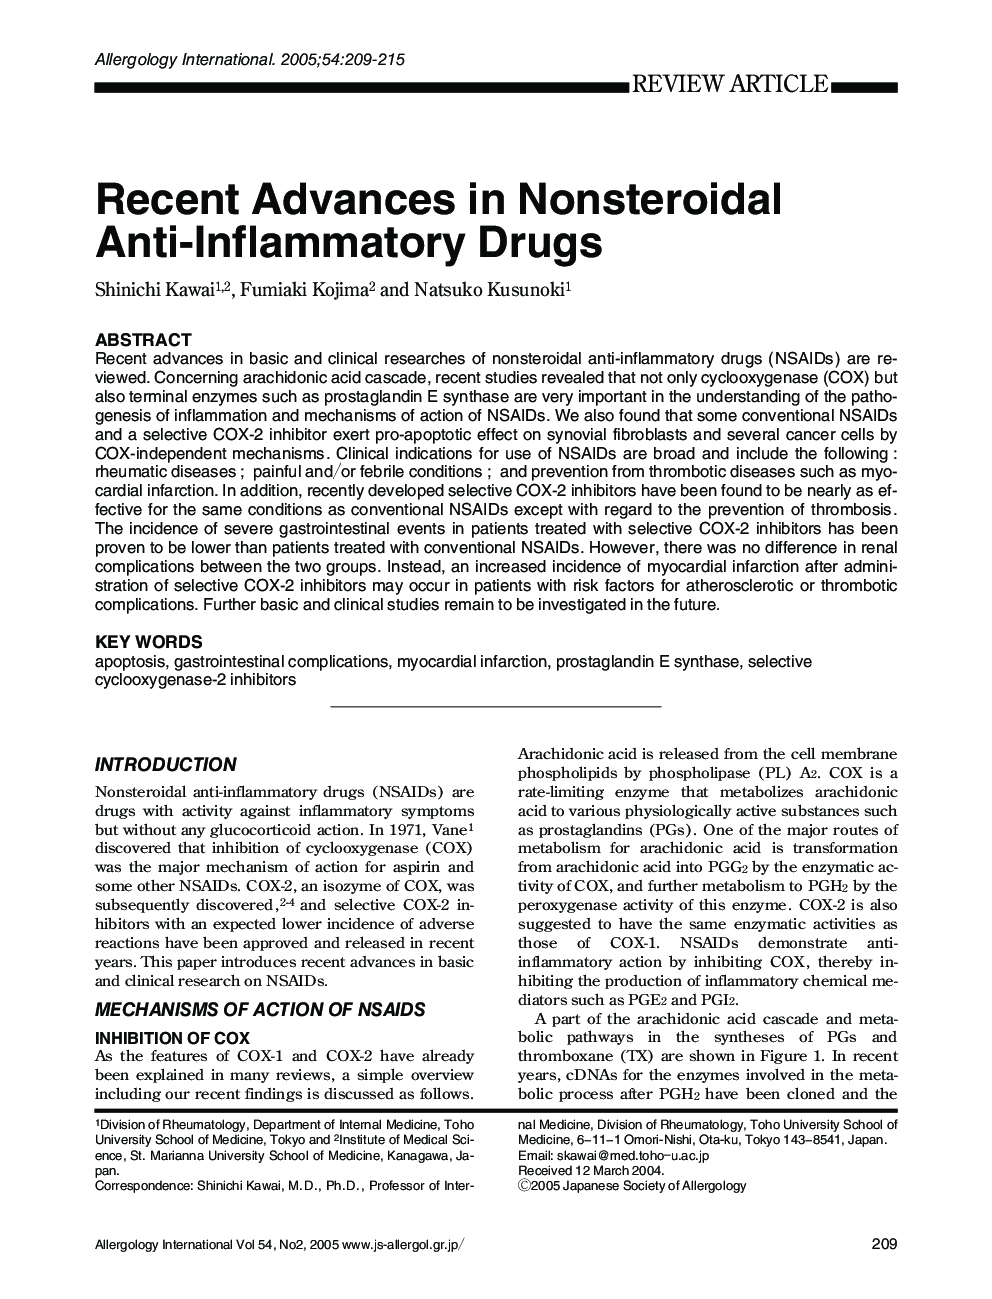 Recent Advances in Nonsteroidal Anti-Inflammatory Drugs